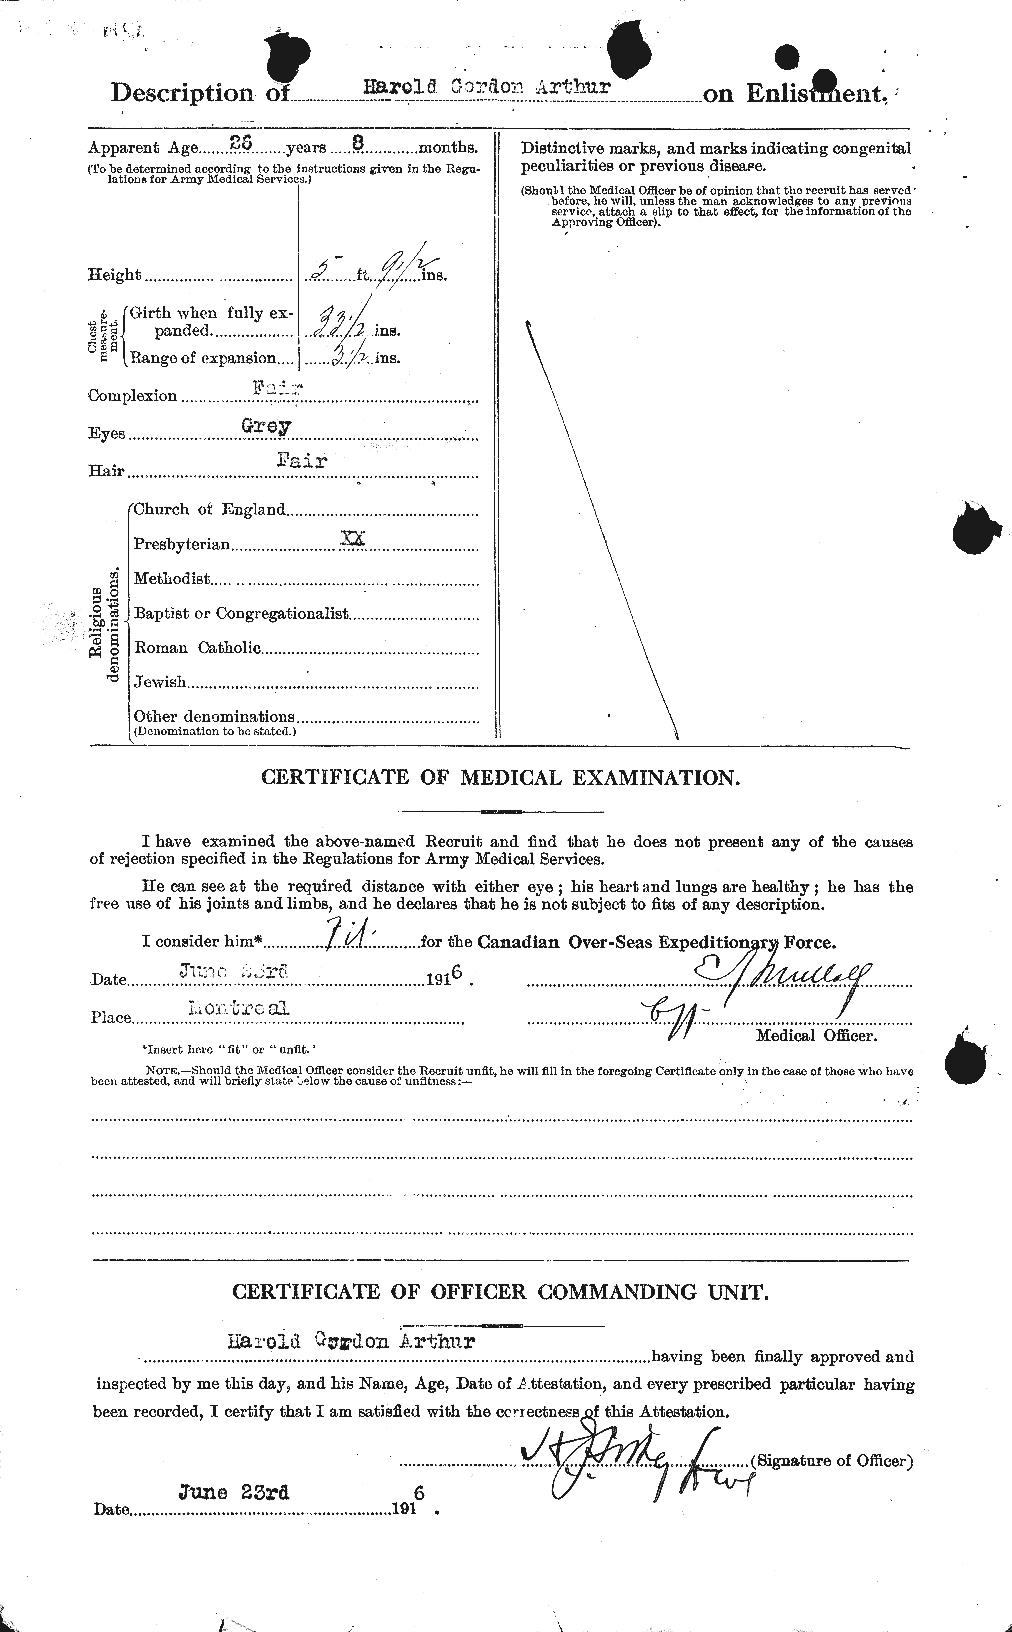 Personnel Records of the First World War - CEF 690900b